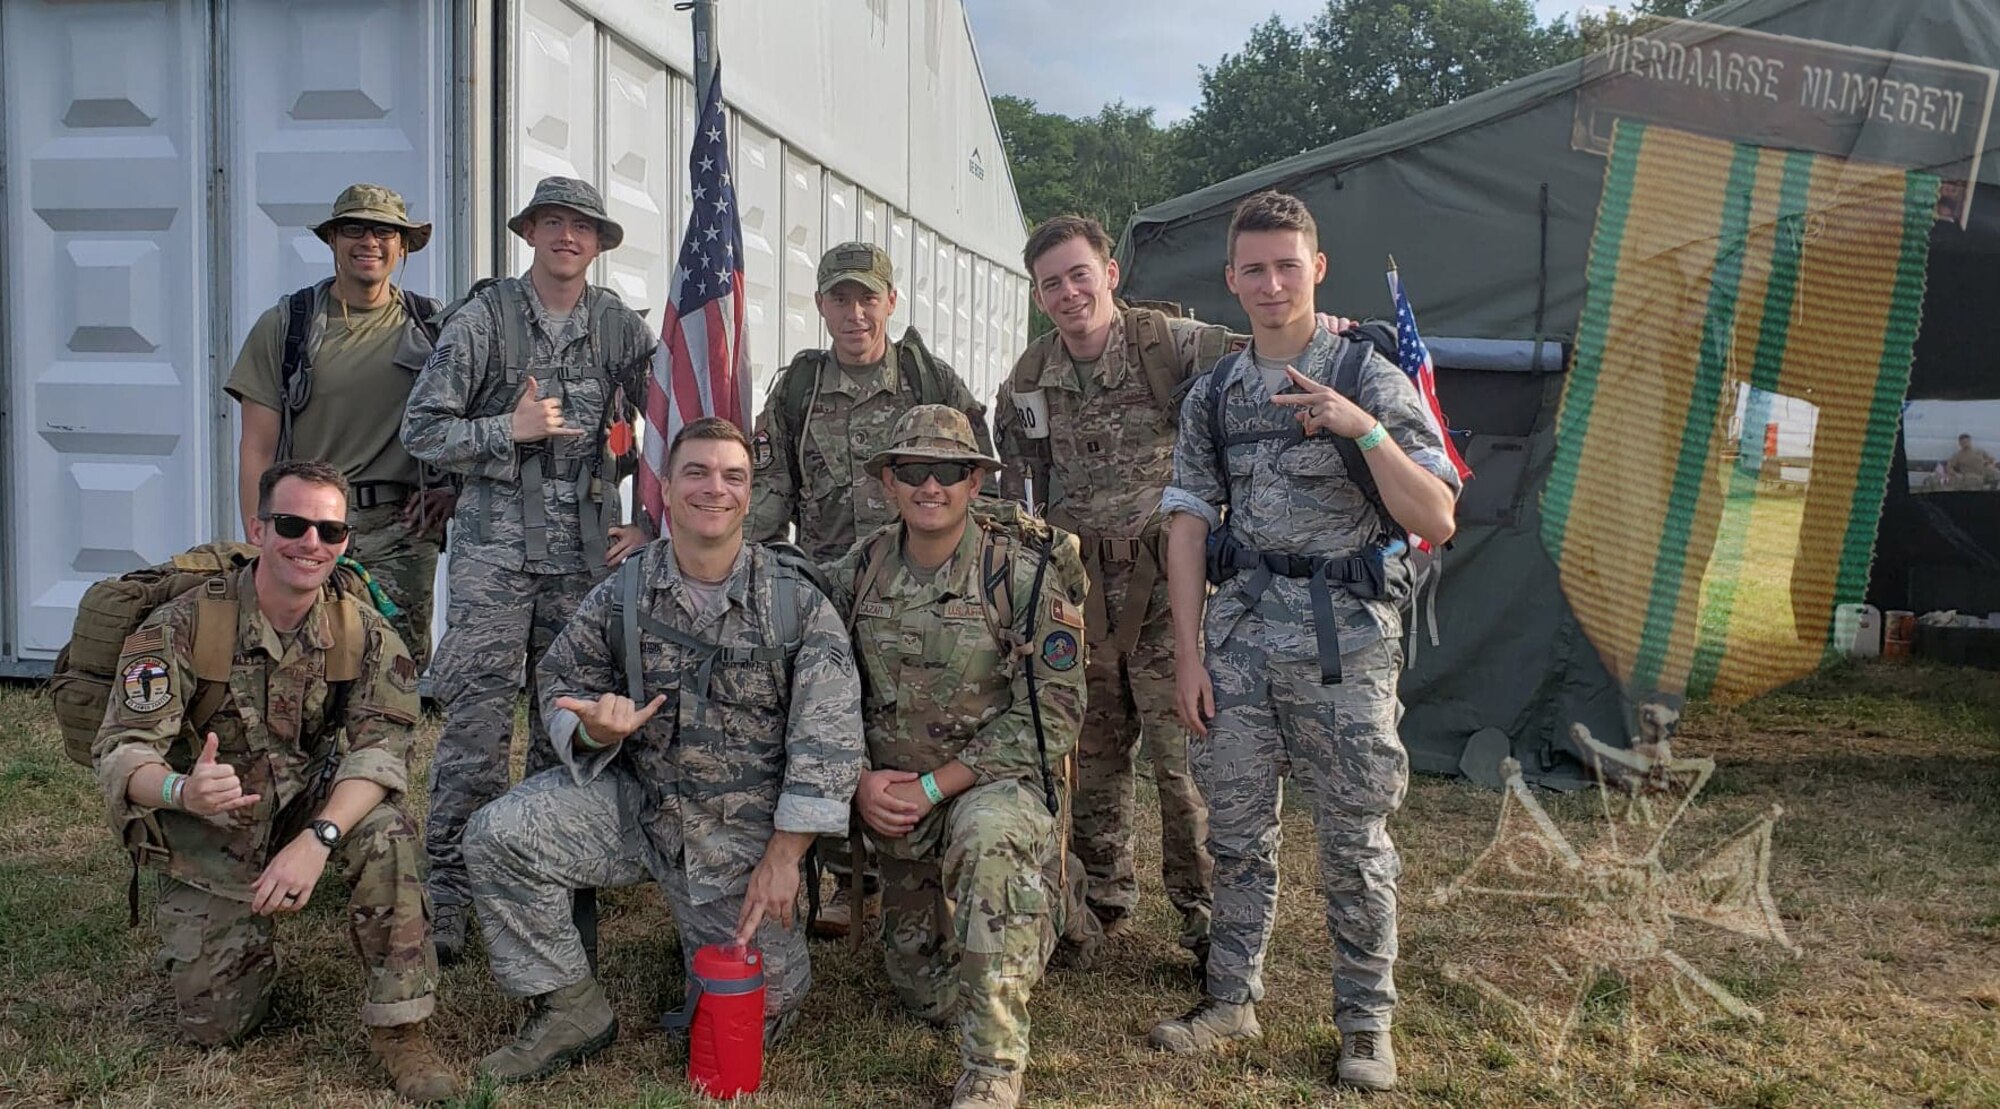 U.S. Air Force Airmen with the 693nd Intelligence, Surveillance and Reconnaissance Group at Ramstein Air Base, Germany, complete the Vierdaagse march in Nijmegen, Netherlands, July 16-19, 2019. Each of the eight Airmen carried 22 pounds for 100 miles over a 4-day period. The overlay is of the Vierdaagsekruis, or Four Days Cross medal, which was presented to participants by the Dutch government. (Courtesy photo illustration)